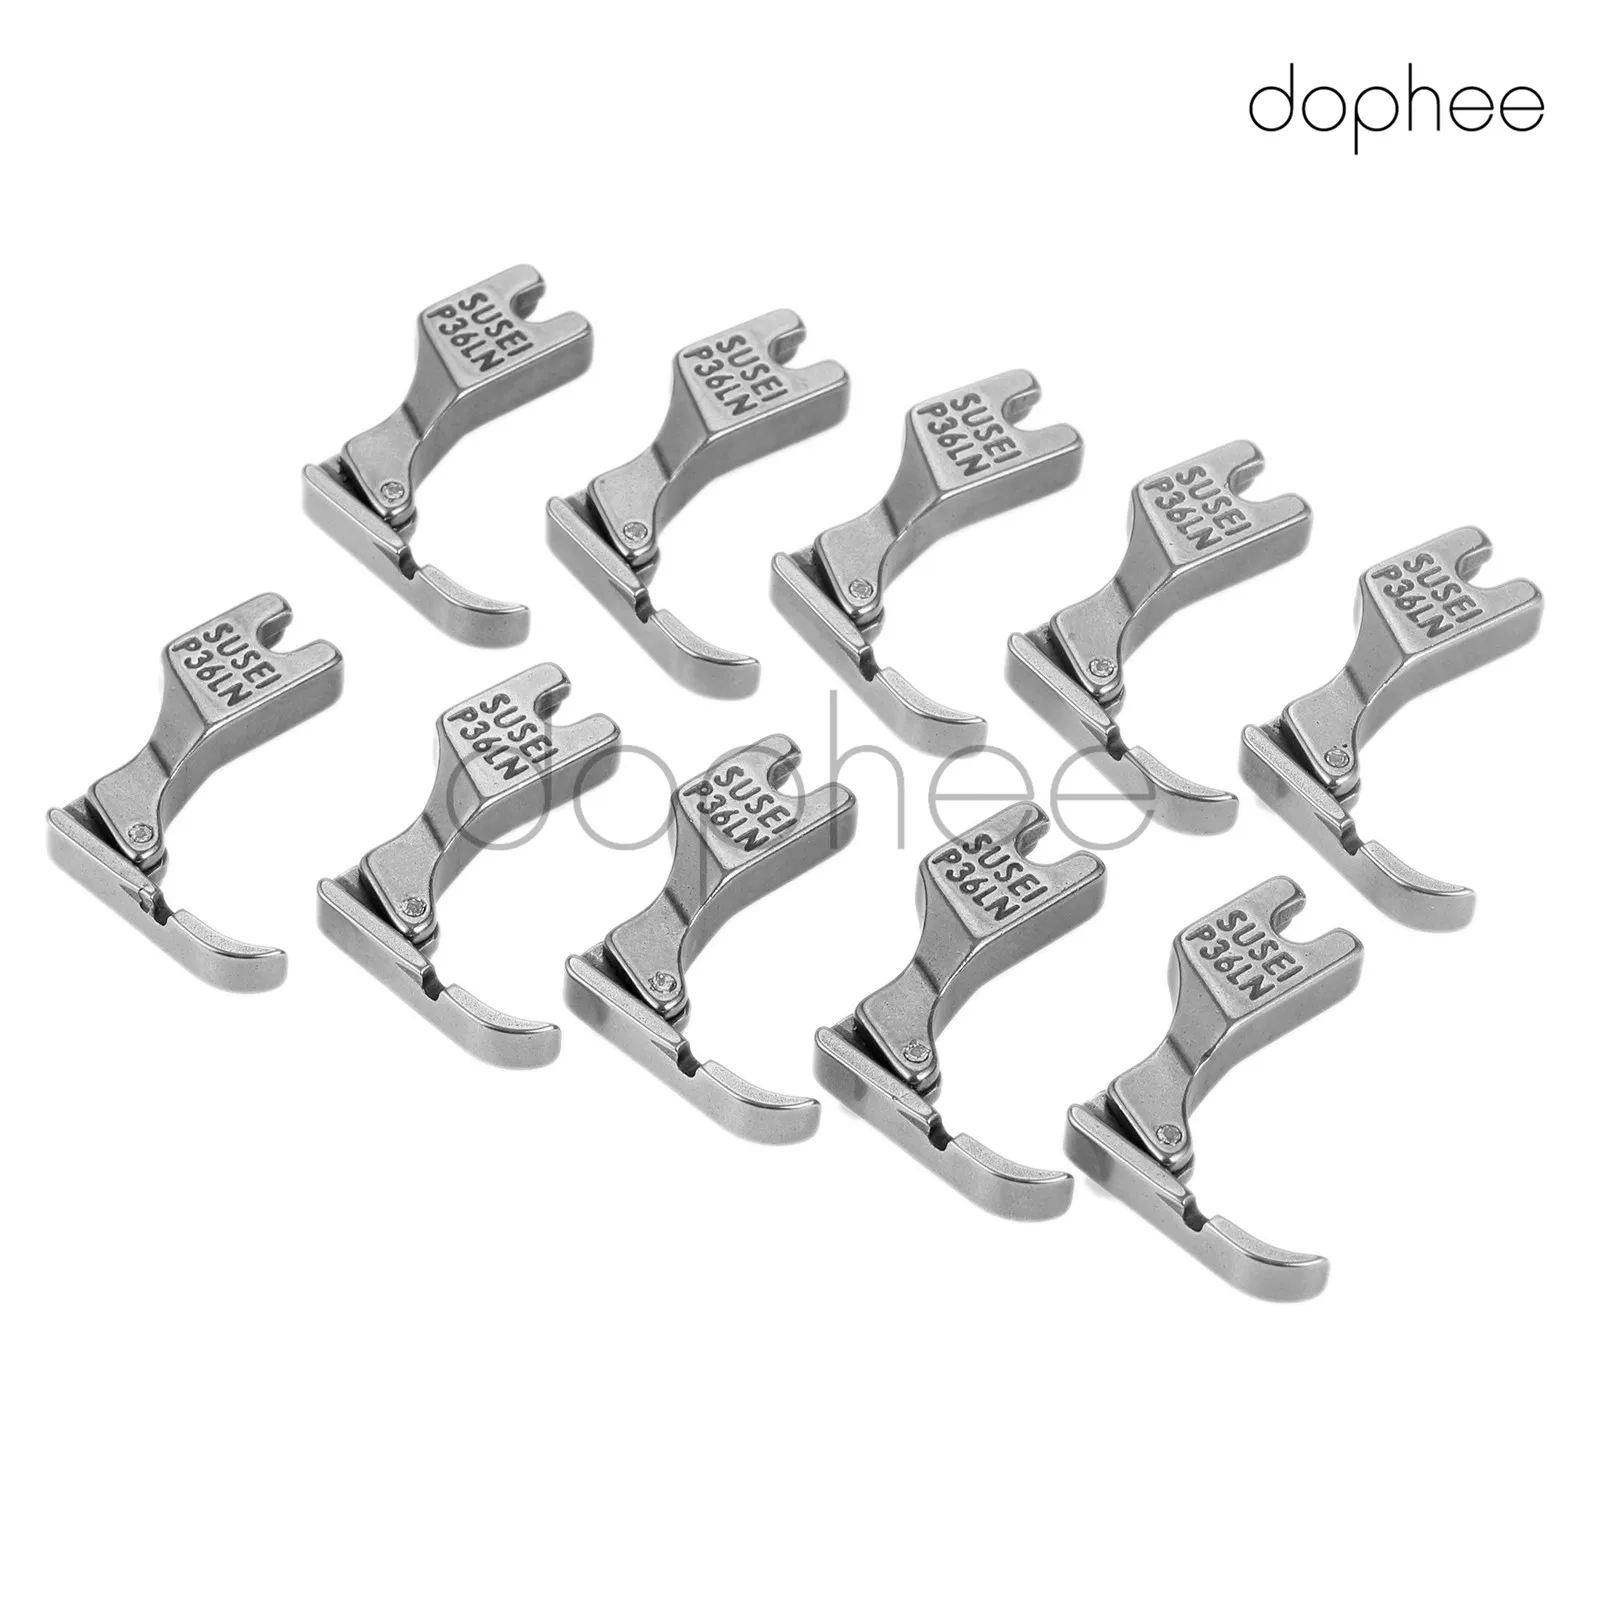 

dophee 10pcs P36LN Industrial Sewing Machine Left Presser Foot Hinged Cording Zipper Foot For Single Needle Sewing Machine